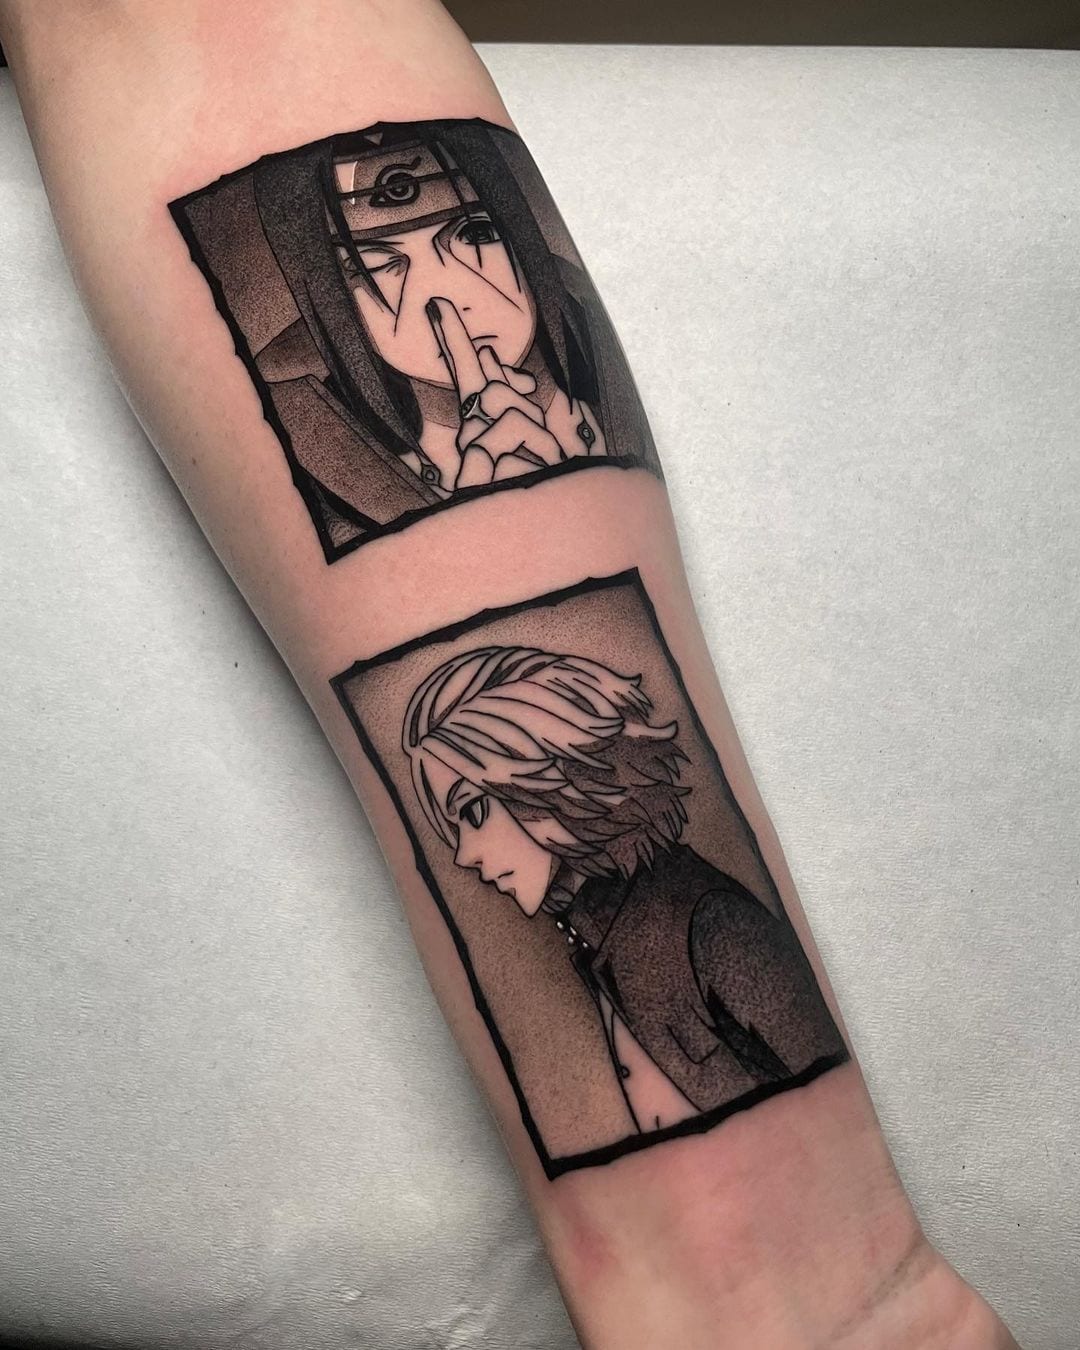 Tokyo Revengers Tattoos: Wear Your Fandom with Pride